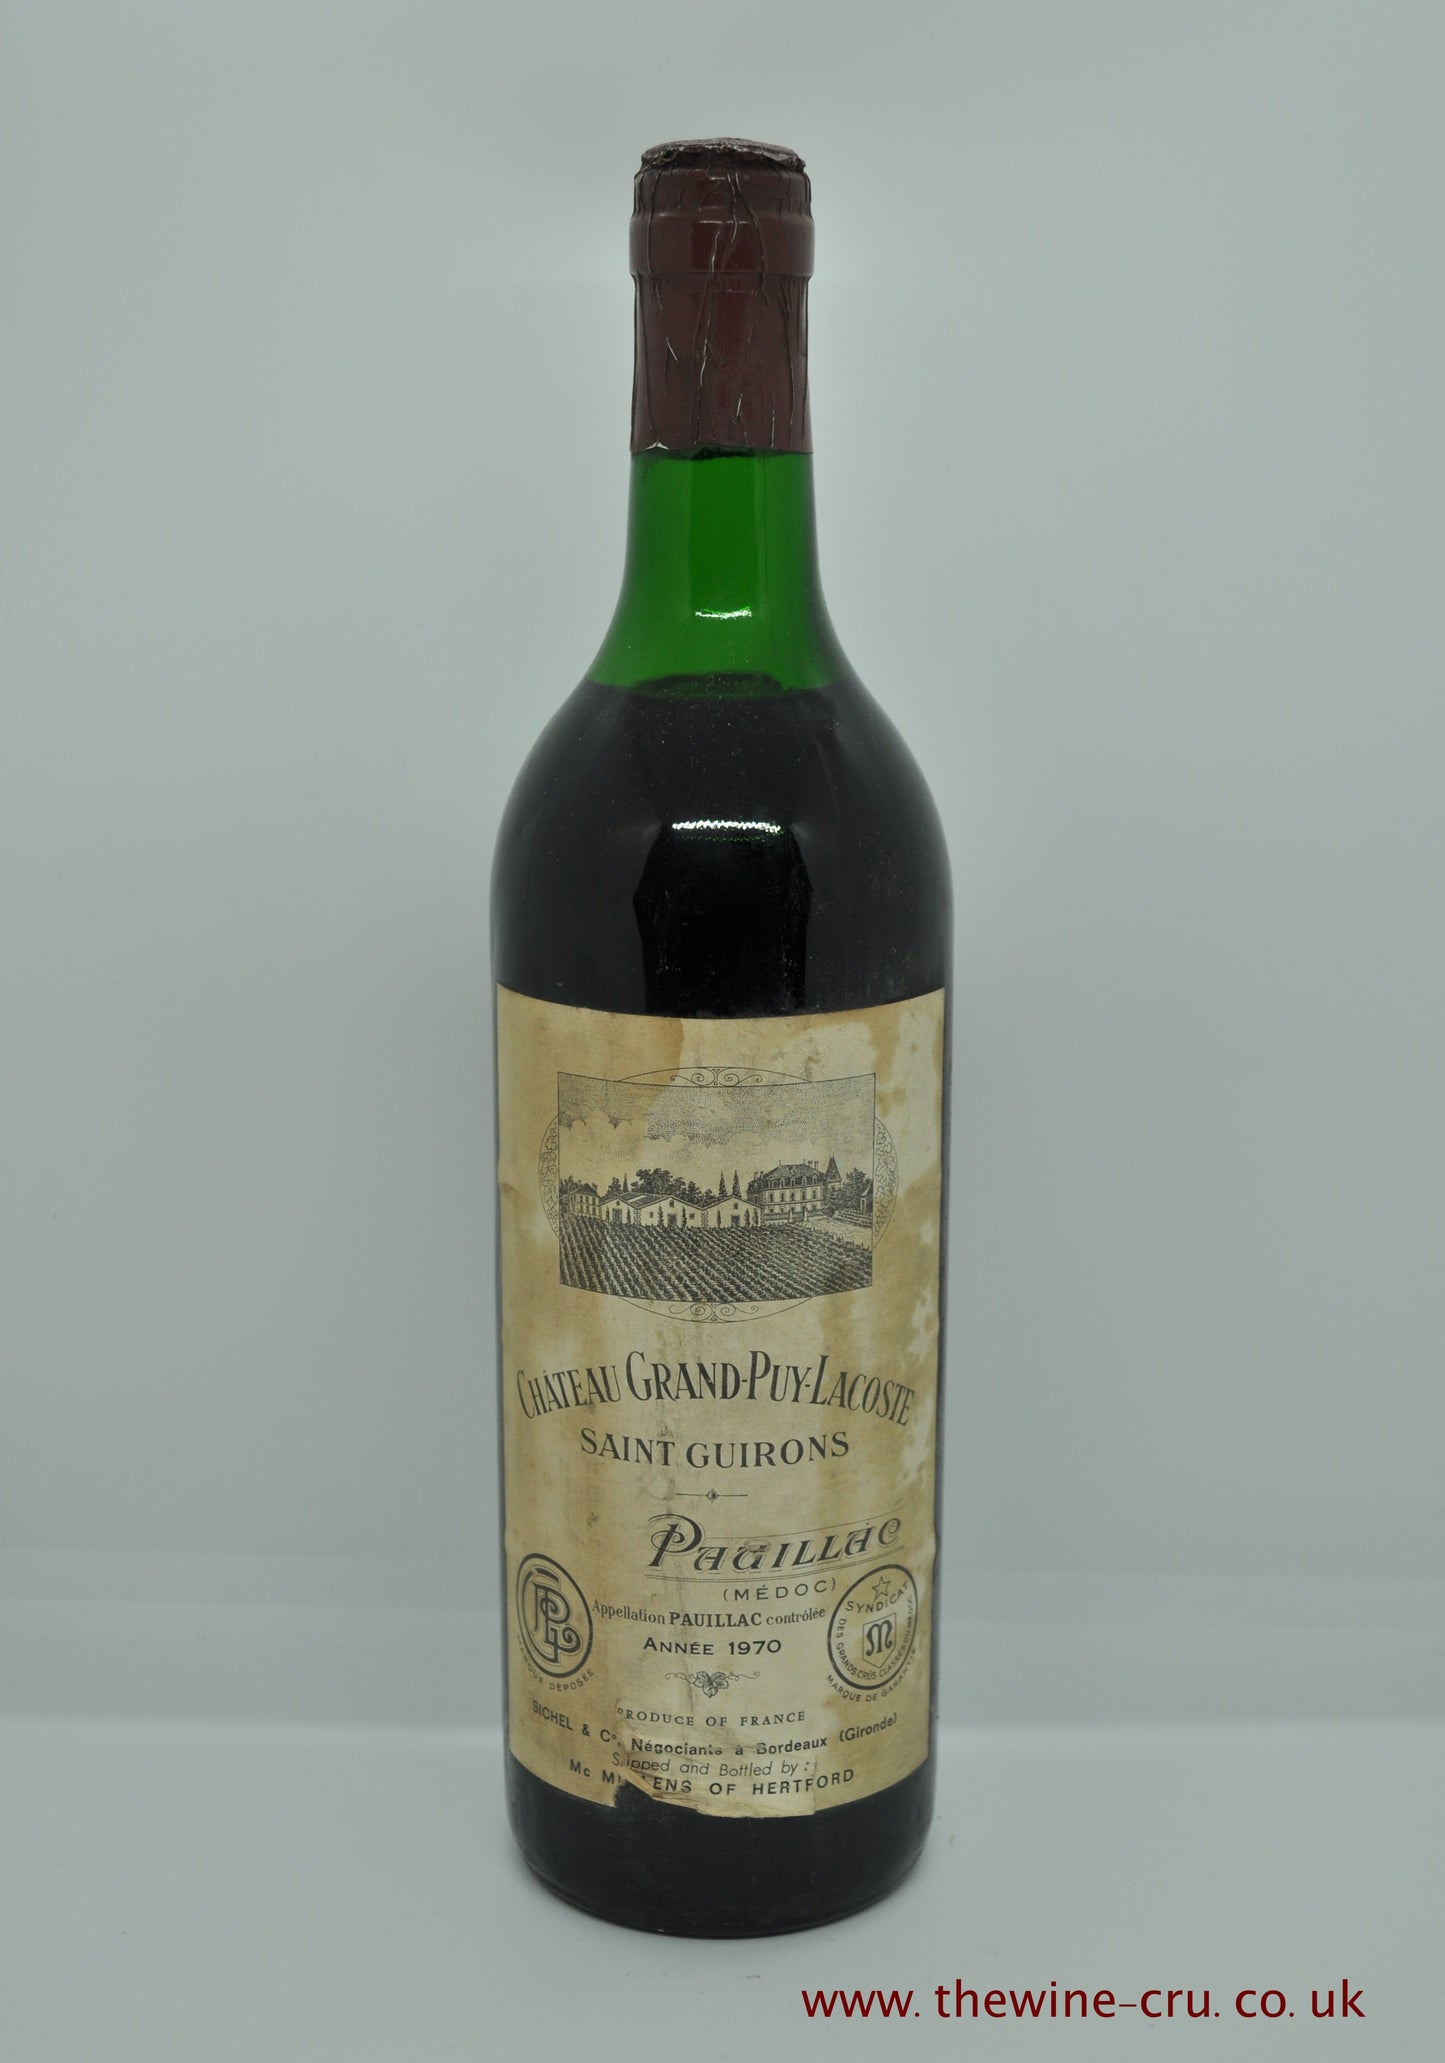 1970 vintage red wine. Chateau Grand Puy Lacoste 1970. France, Bordeaux. Immediate delivery. Free local delivery.